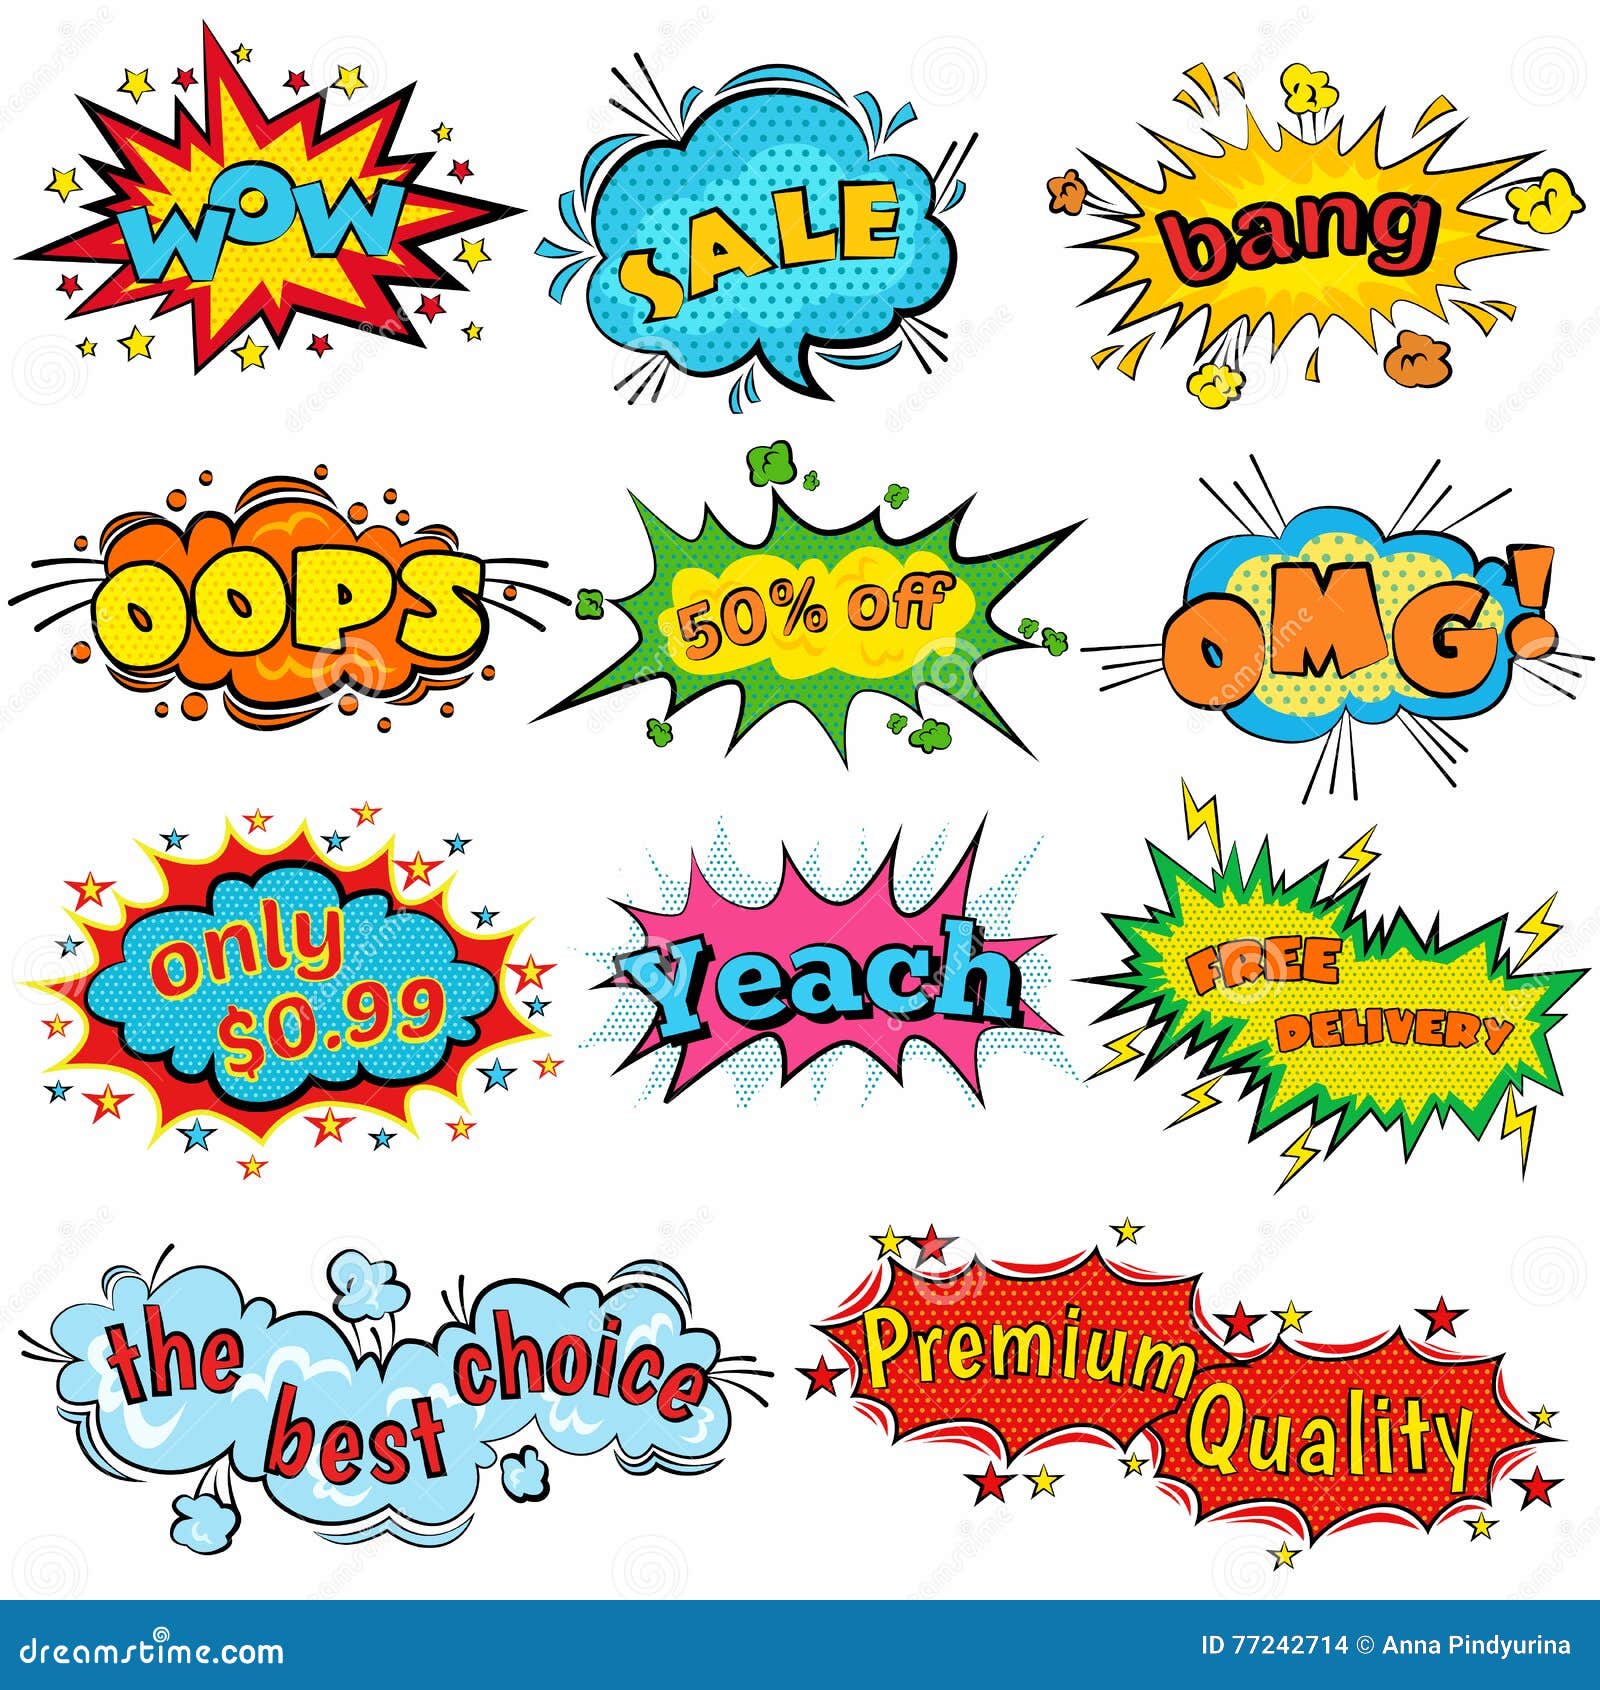 Comic Sound Effects in Pop Art Vector Style. Sound Bubble Speech with Word and Comic Cartoon Expression Sounds Stock Vector - Illustration of banner, sale: